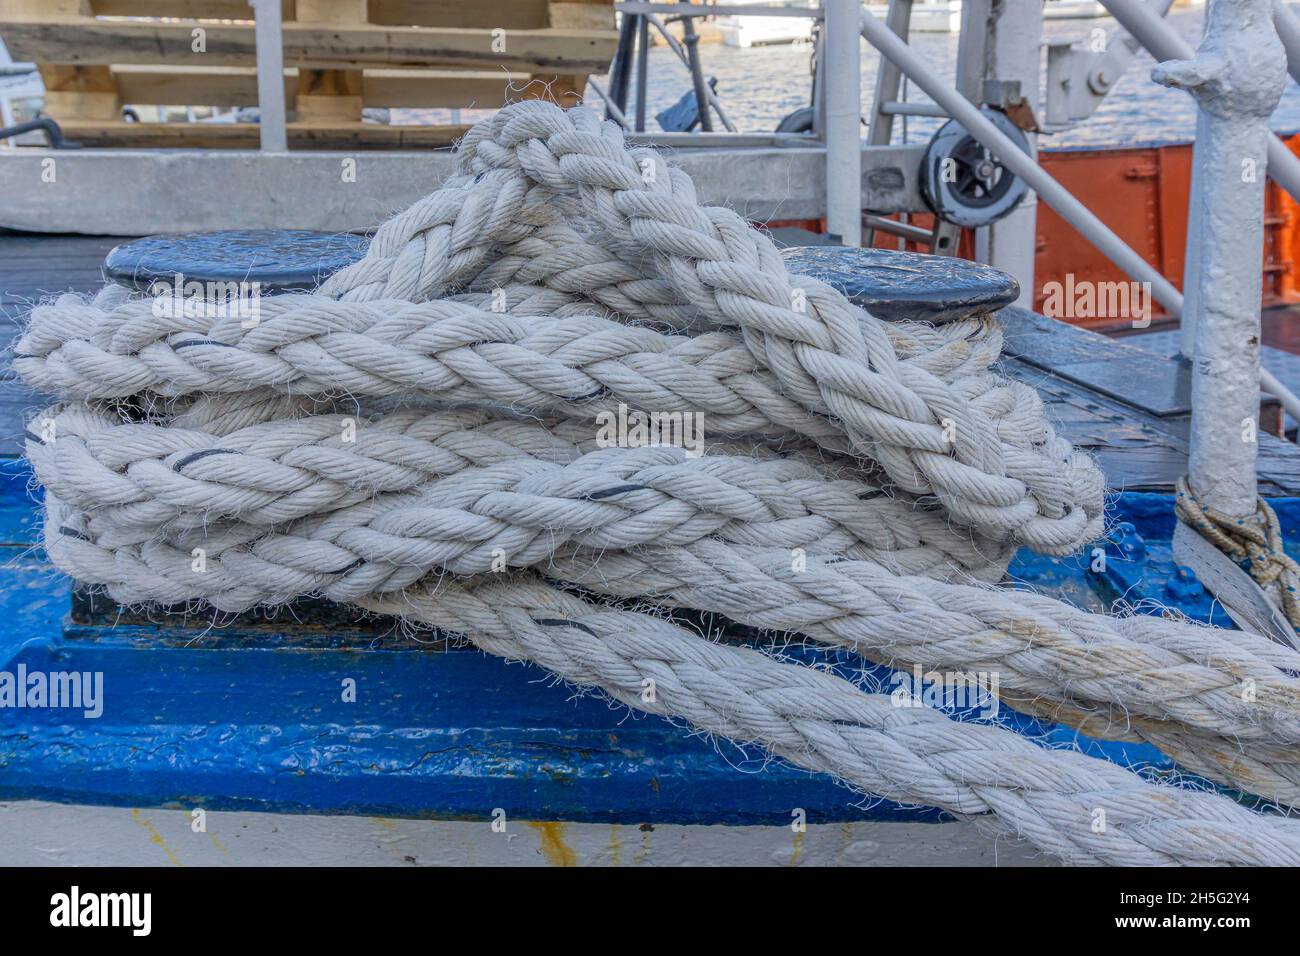 Stockholm, Sweden - April 17, 2021: Twined cream white rope on the ferries bollard Stock Photo